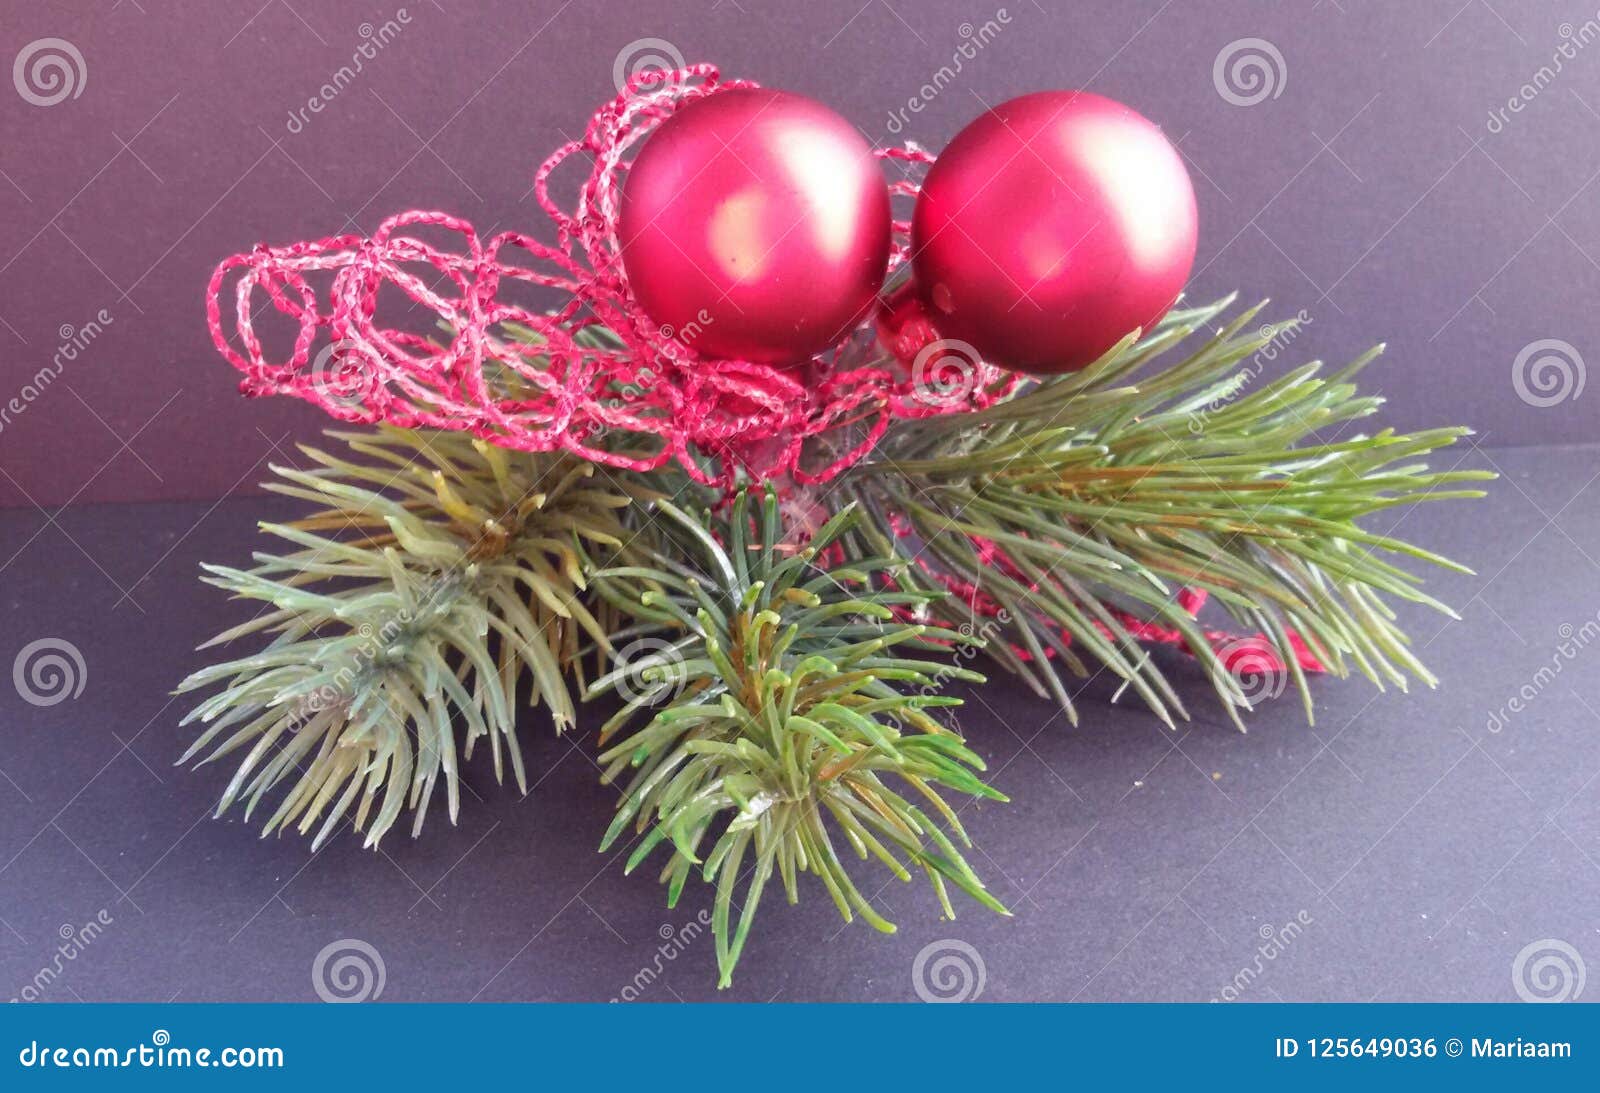 Christmas Decoration with Different Ornaments. Beautiful Festive Decor ...